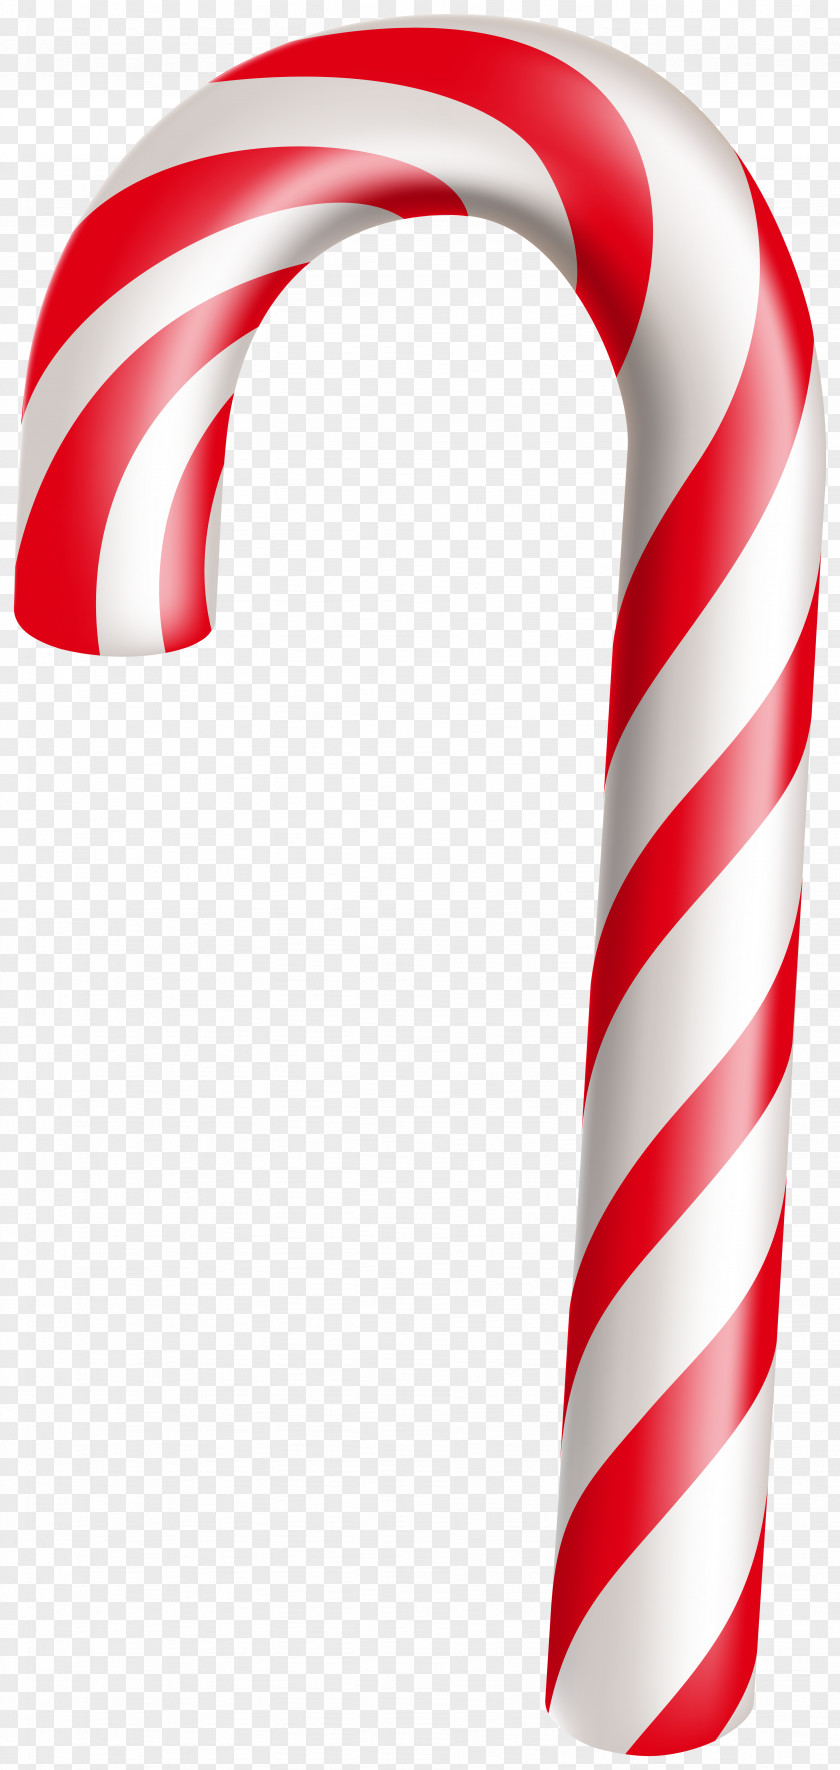 Stockings Insignia Candy Cane Christmas Graphics Clip Art Day PNG